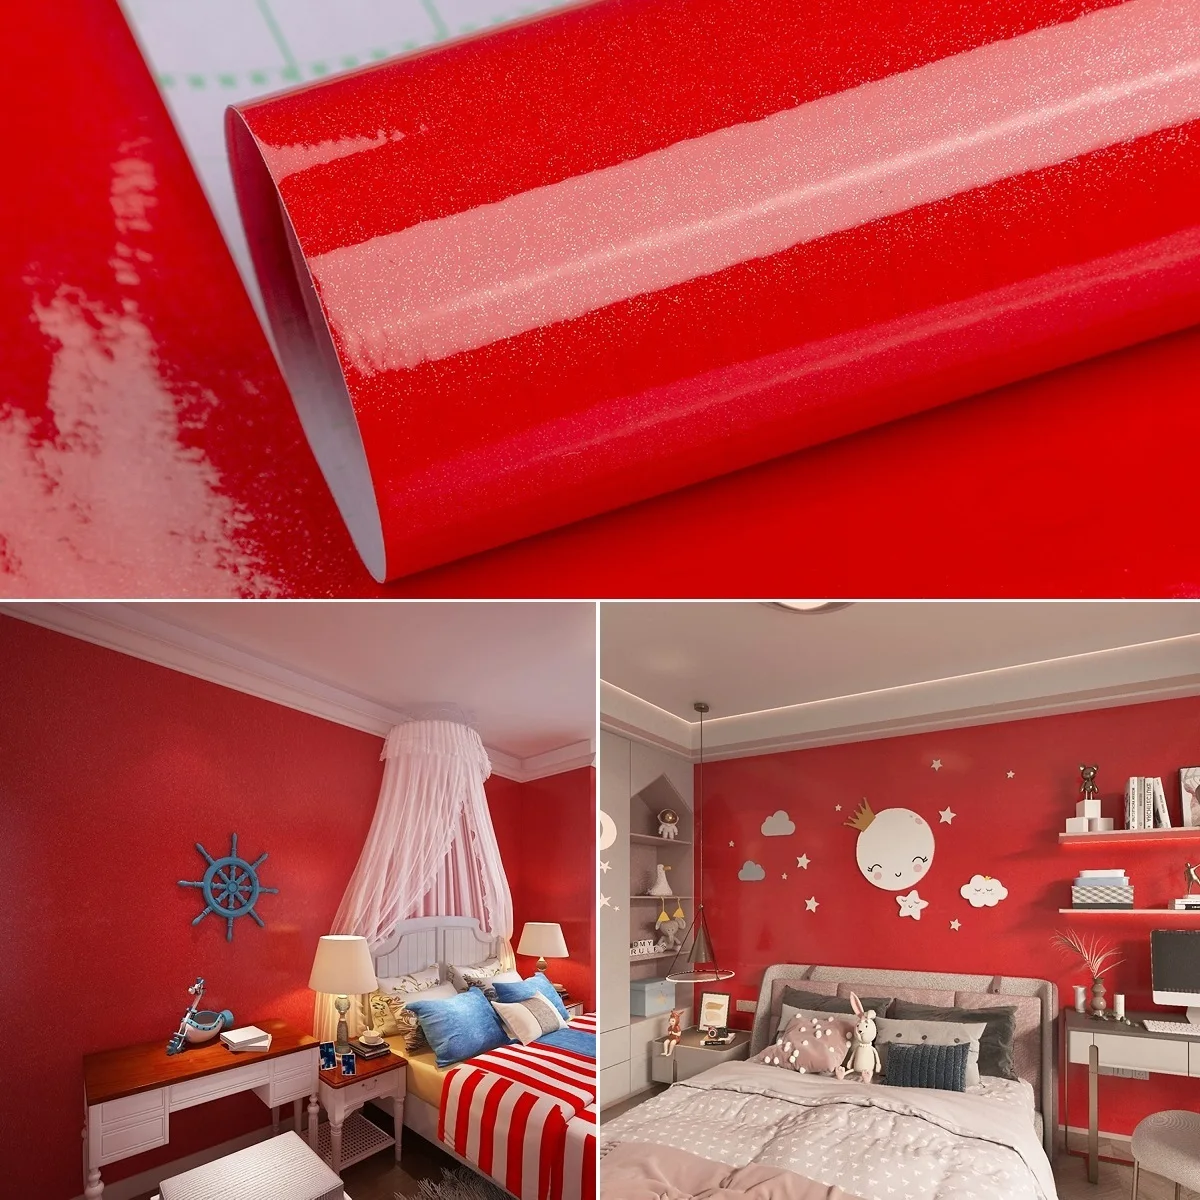 TOTIO Thick Solid Color Red Wall Paper Self Adhesive Vinyl Wallpaper Peel and Stick Interior Stickers Room Decorations For Girls 3d pvc eurpean self adhesive panels vinyl wallpaper for living room bedroom wall decorations living walls sticker room decor